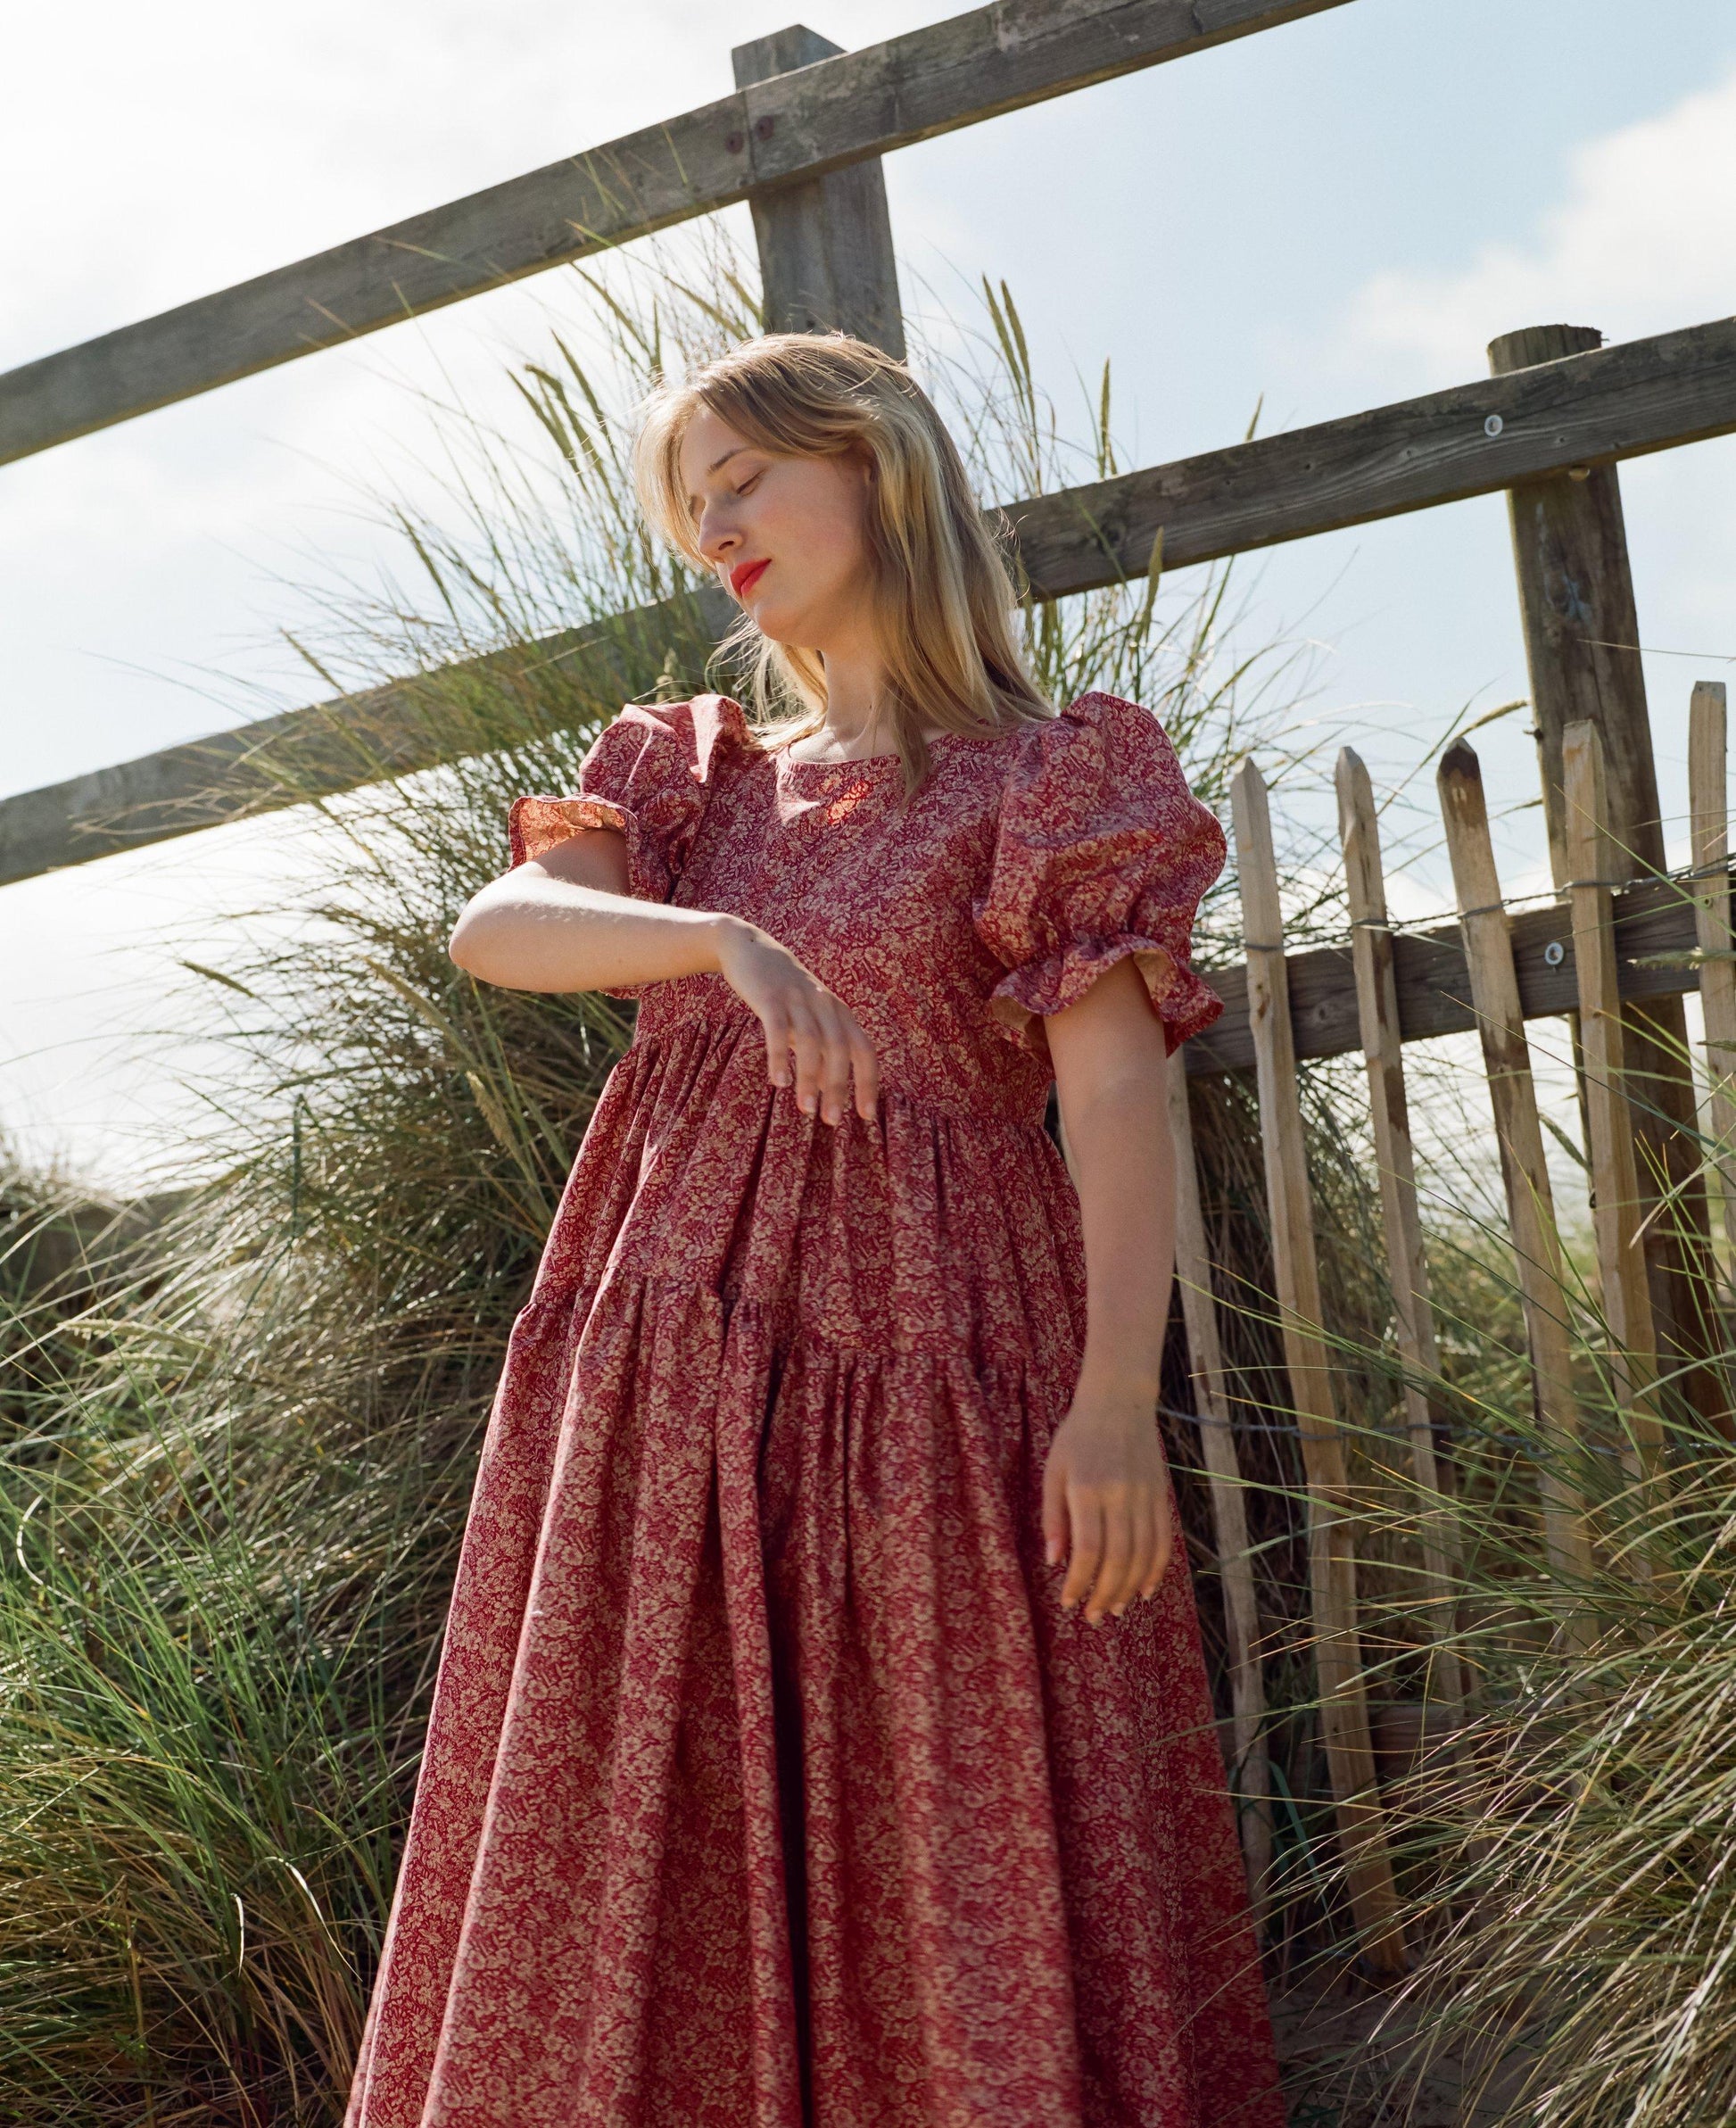 Cecilie Bahnsen inspired cotton dress in red and pink floral poplin. Handmade to order by seamstresses in the UK.